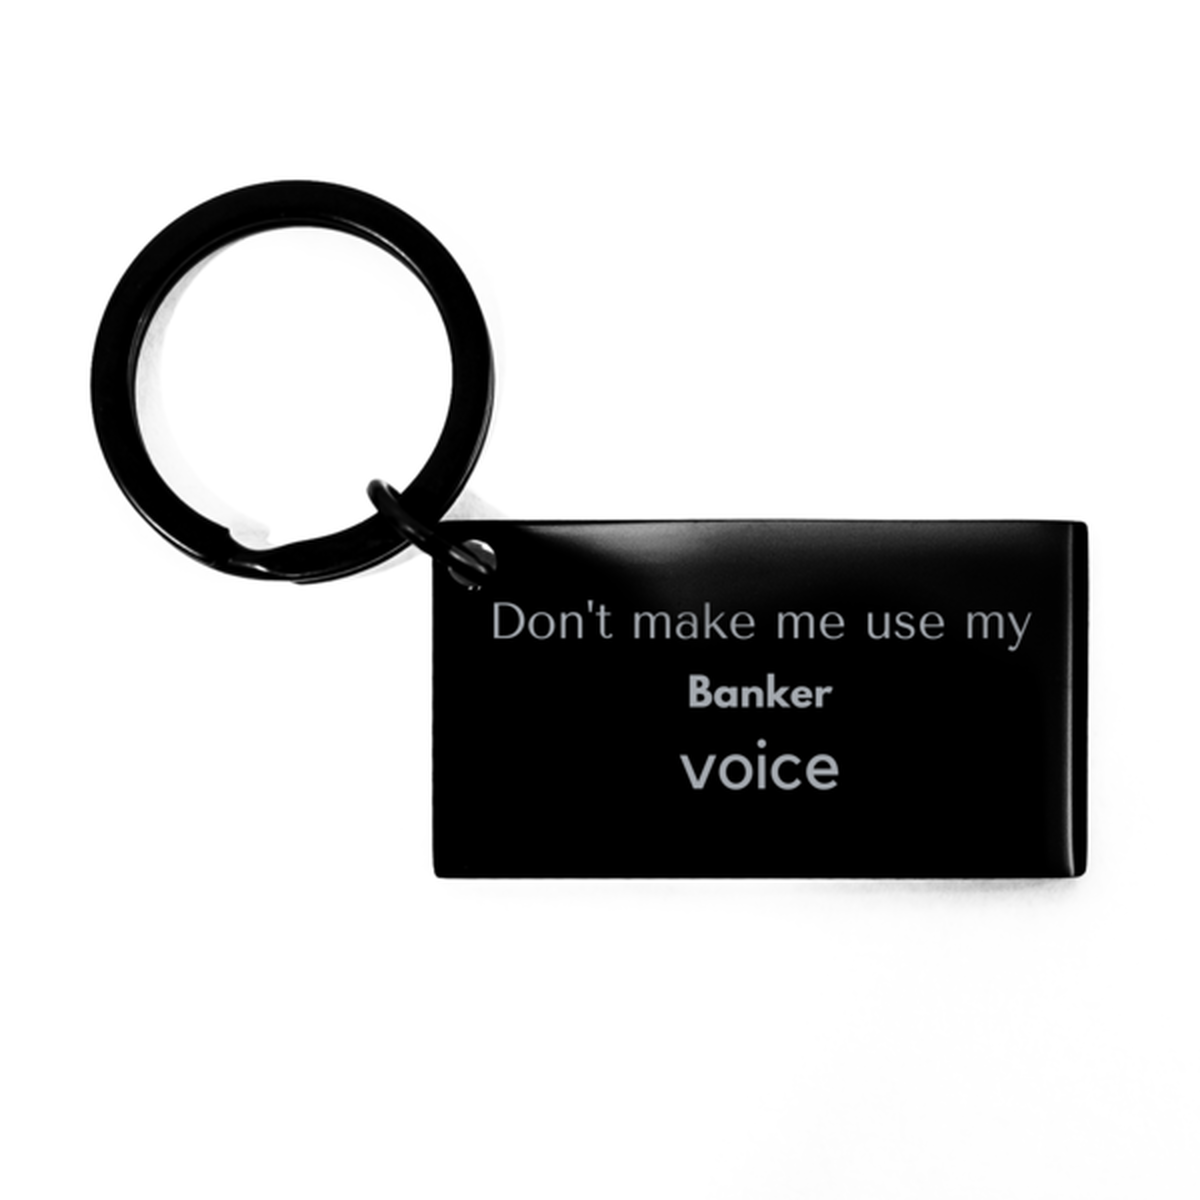 Don't make me use my Banker voice, Sarcasm Banker Gifts, Christmas Banker Keychain Birthday Unique Gifts For Banker Coworkers, Men, Women, Colleague, Friends